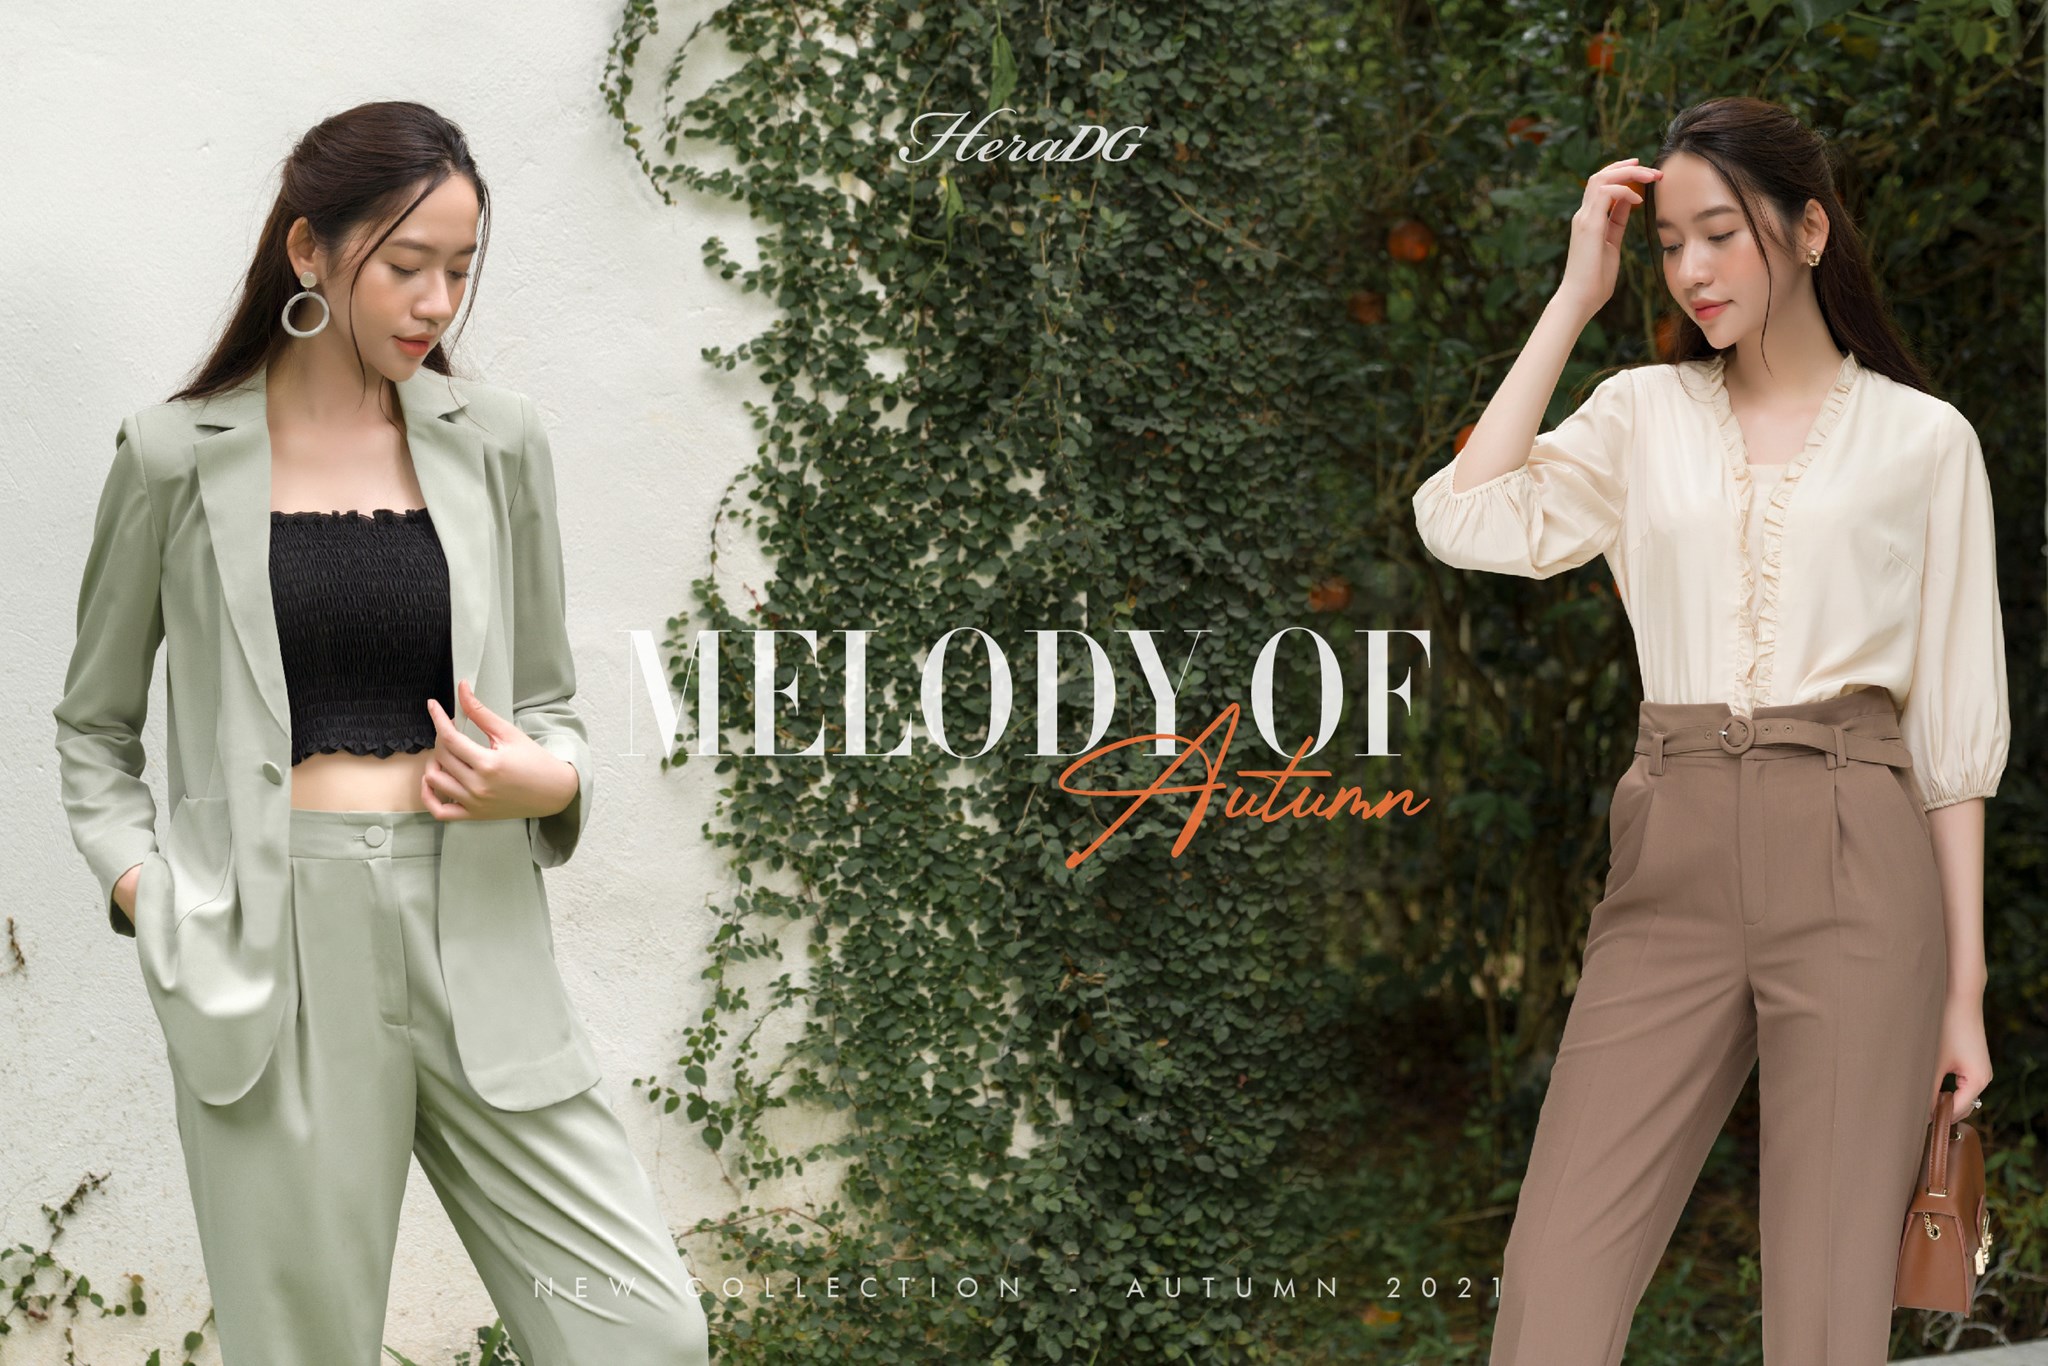 MELODY OF AUTUMN || NEW COLLECTION 